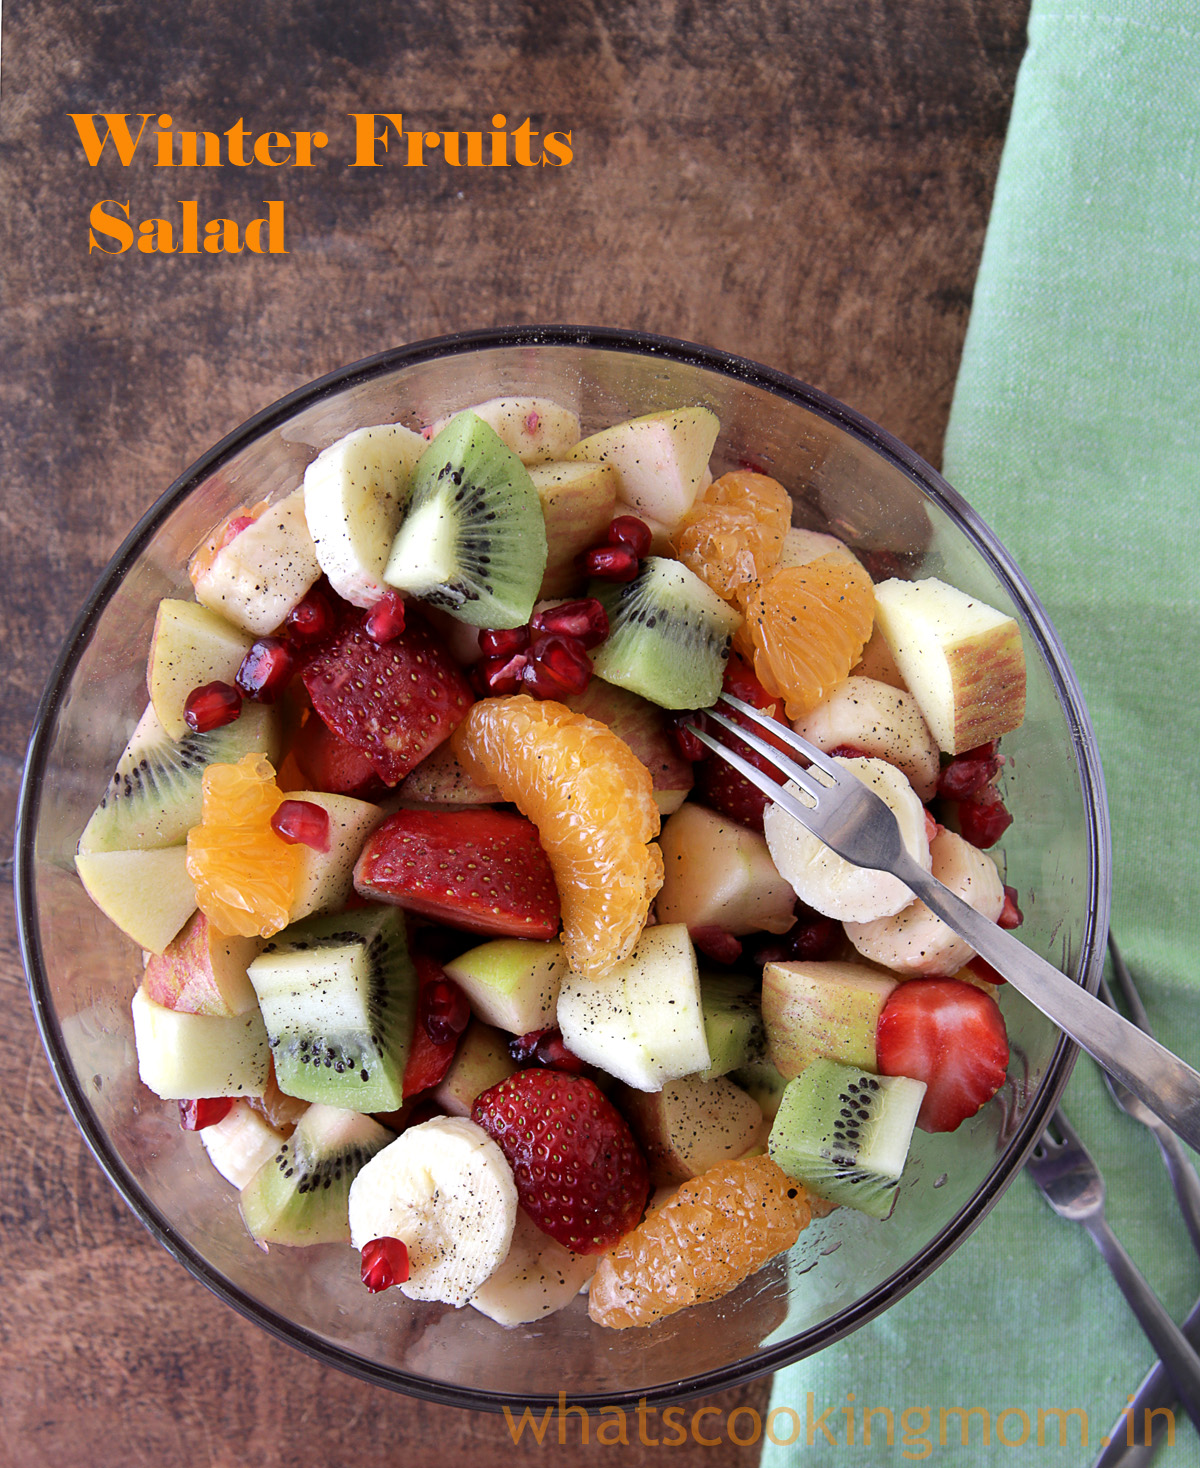 Winter Fruits Salad served in a glass bowl with fork